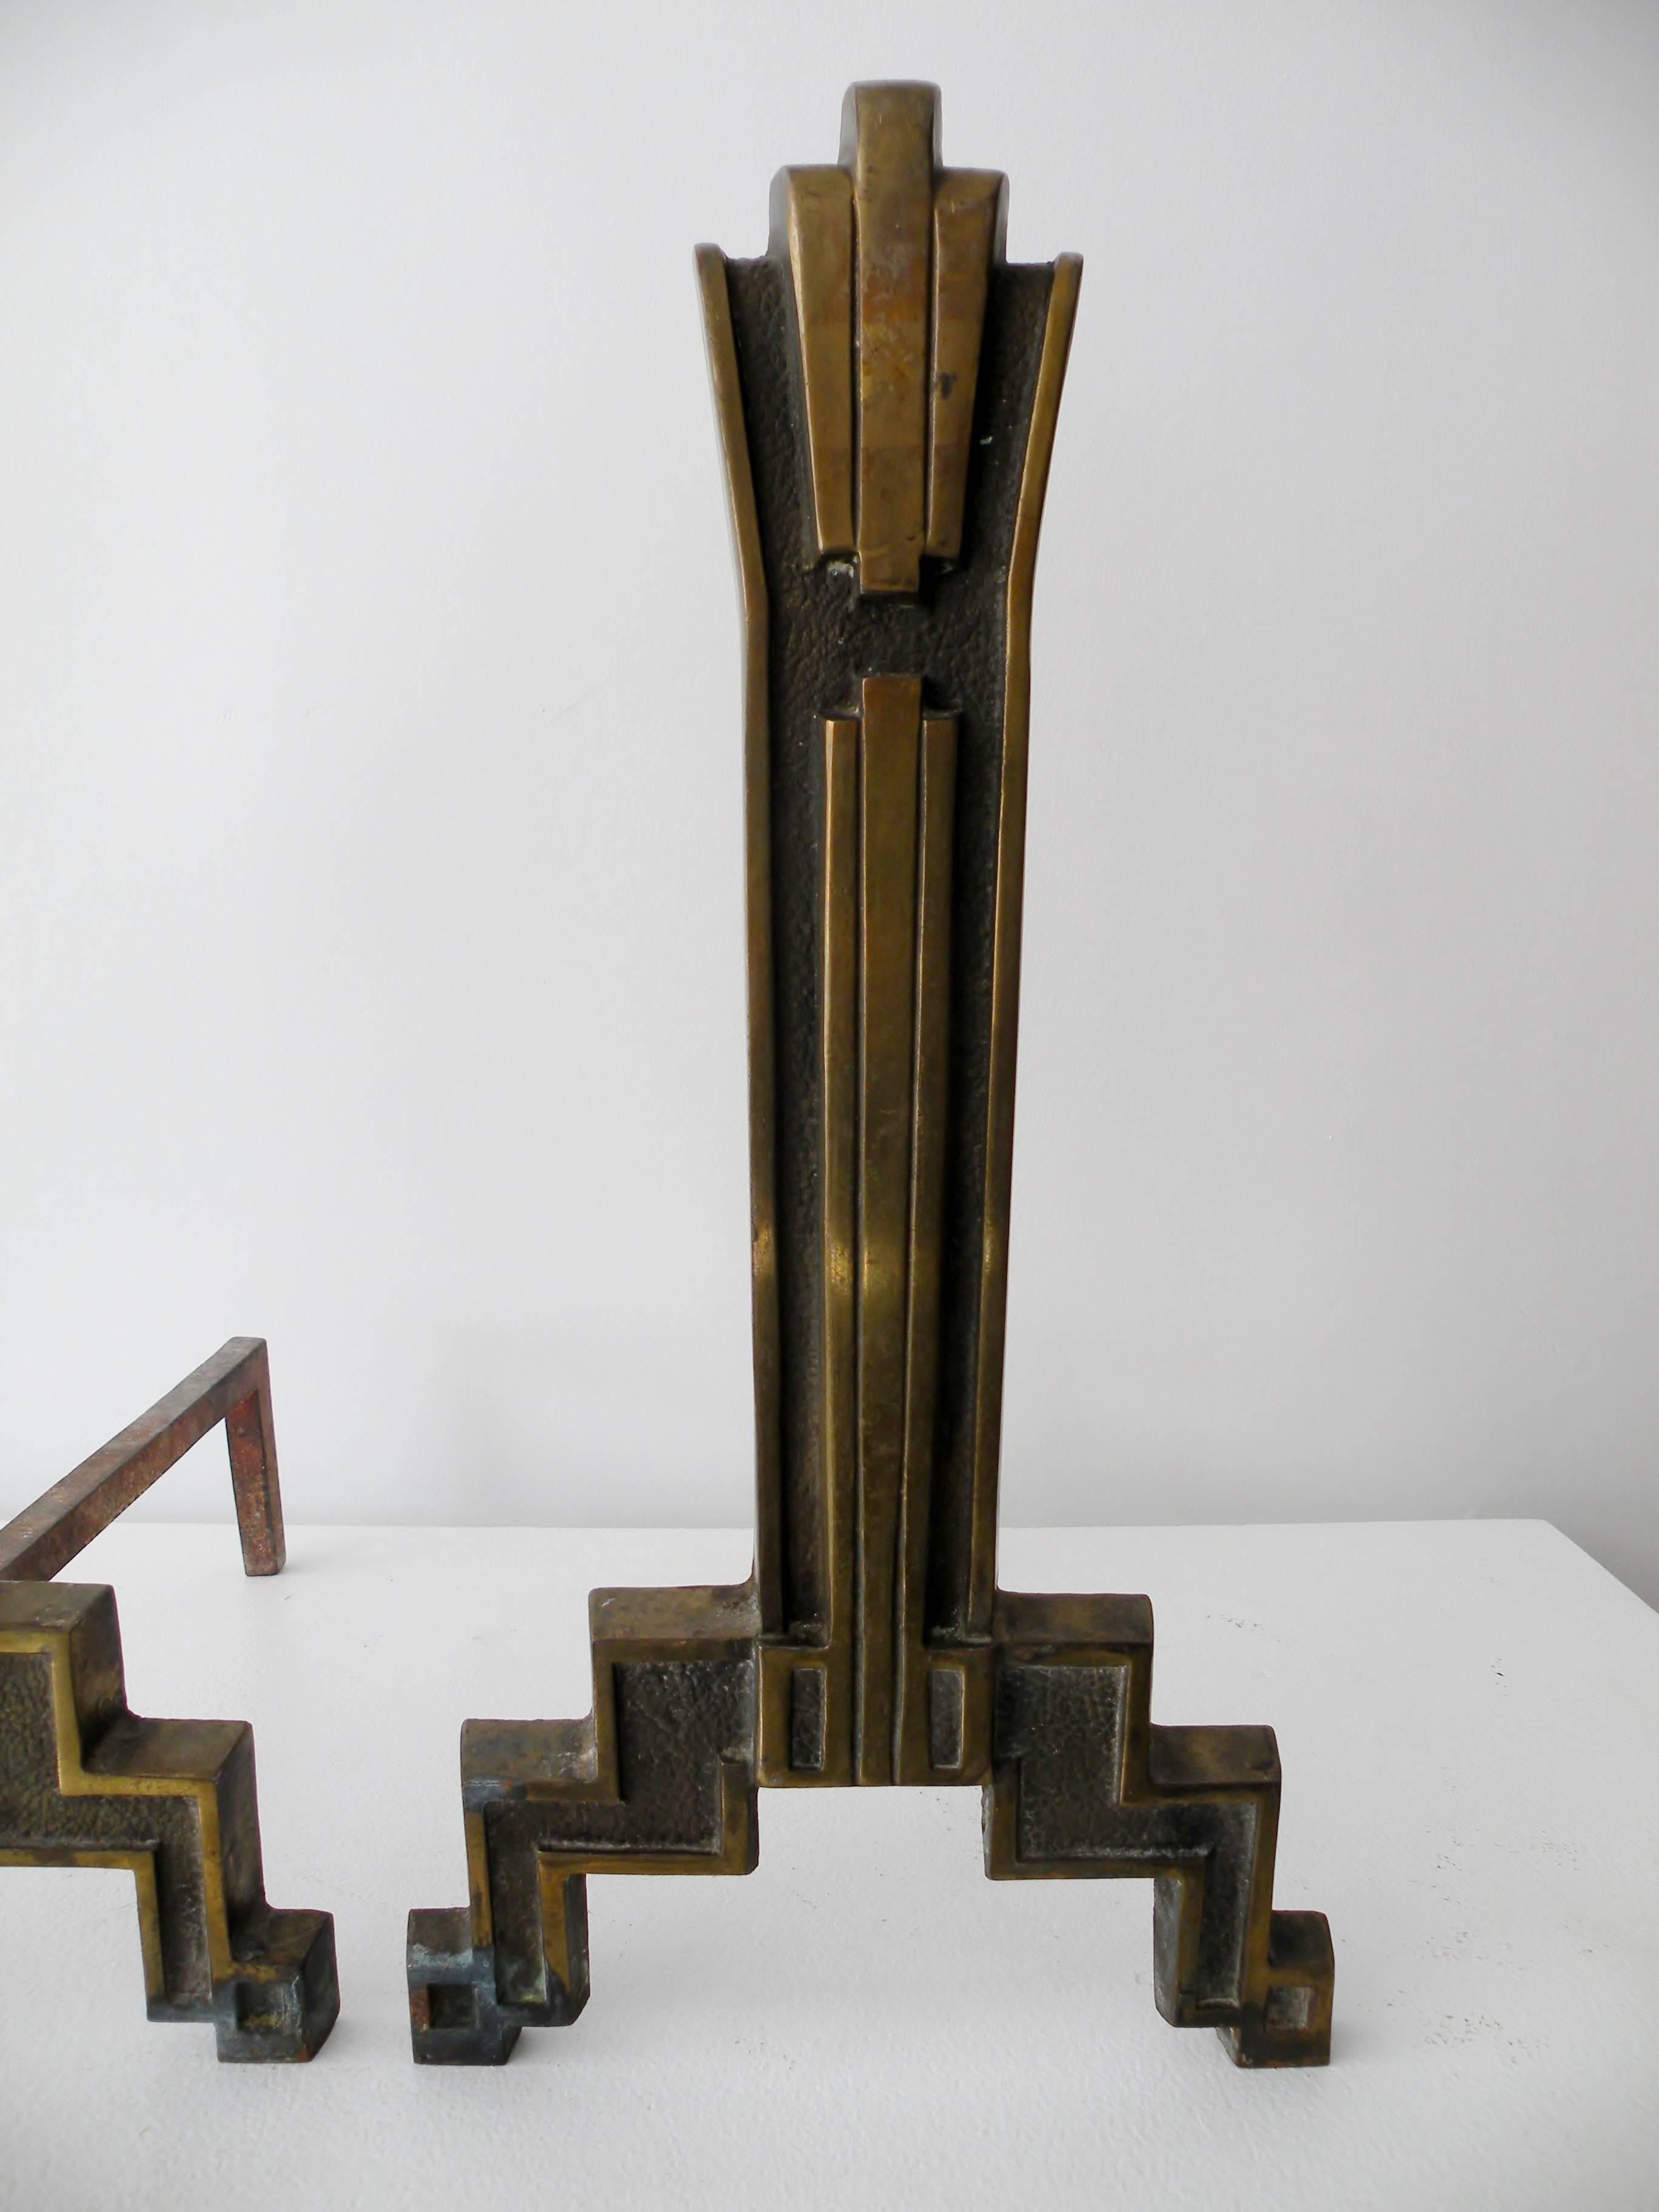 Pair of 1920s era cast iron geometric skyscraper styled Art Deco fireplace andirons or firedogs. Total height 18.5